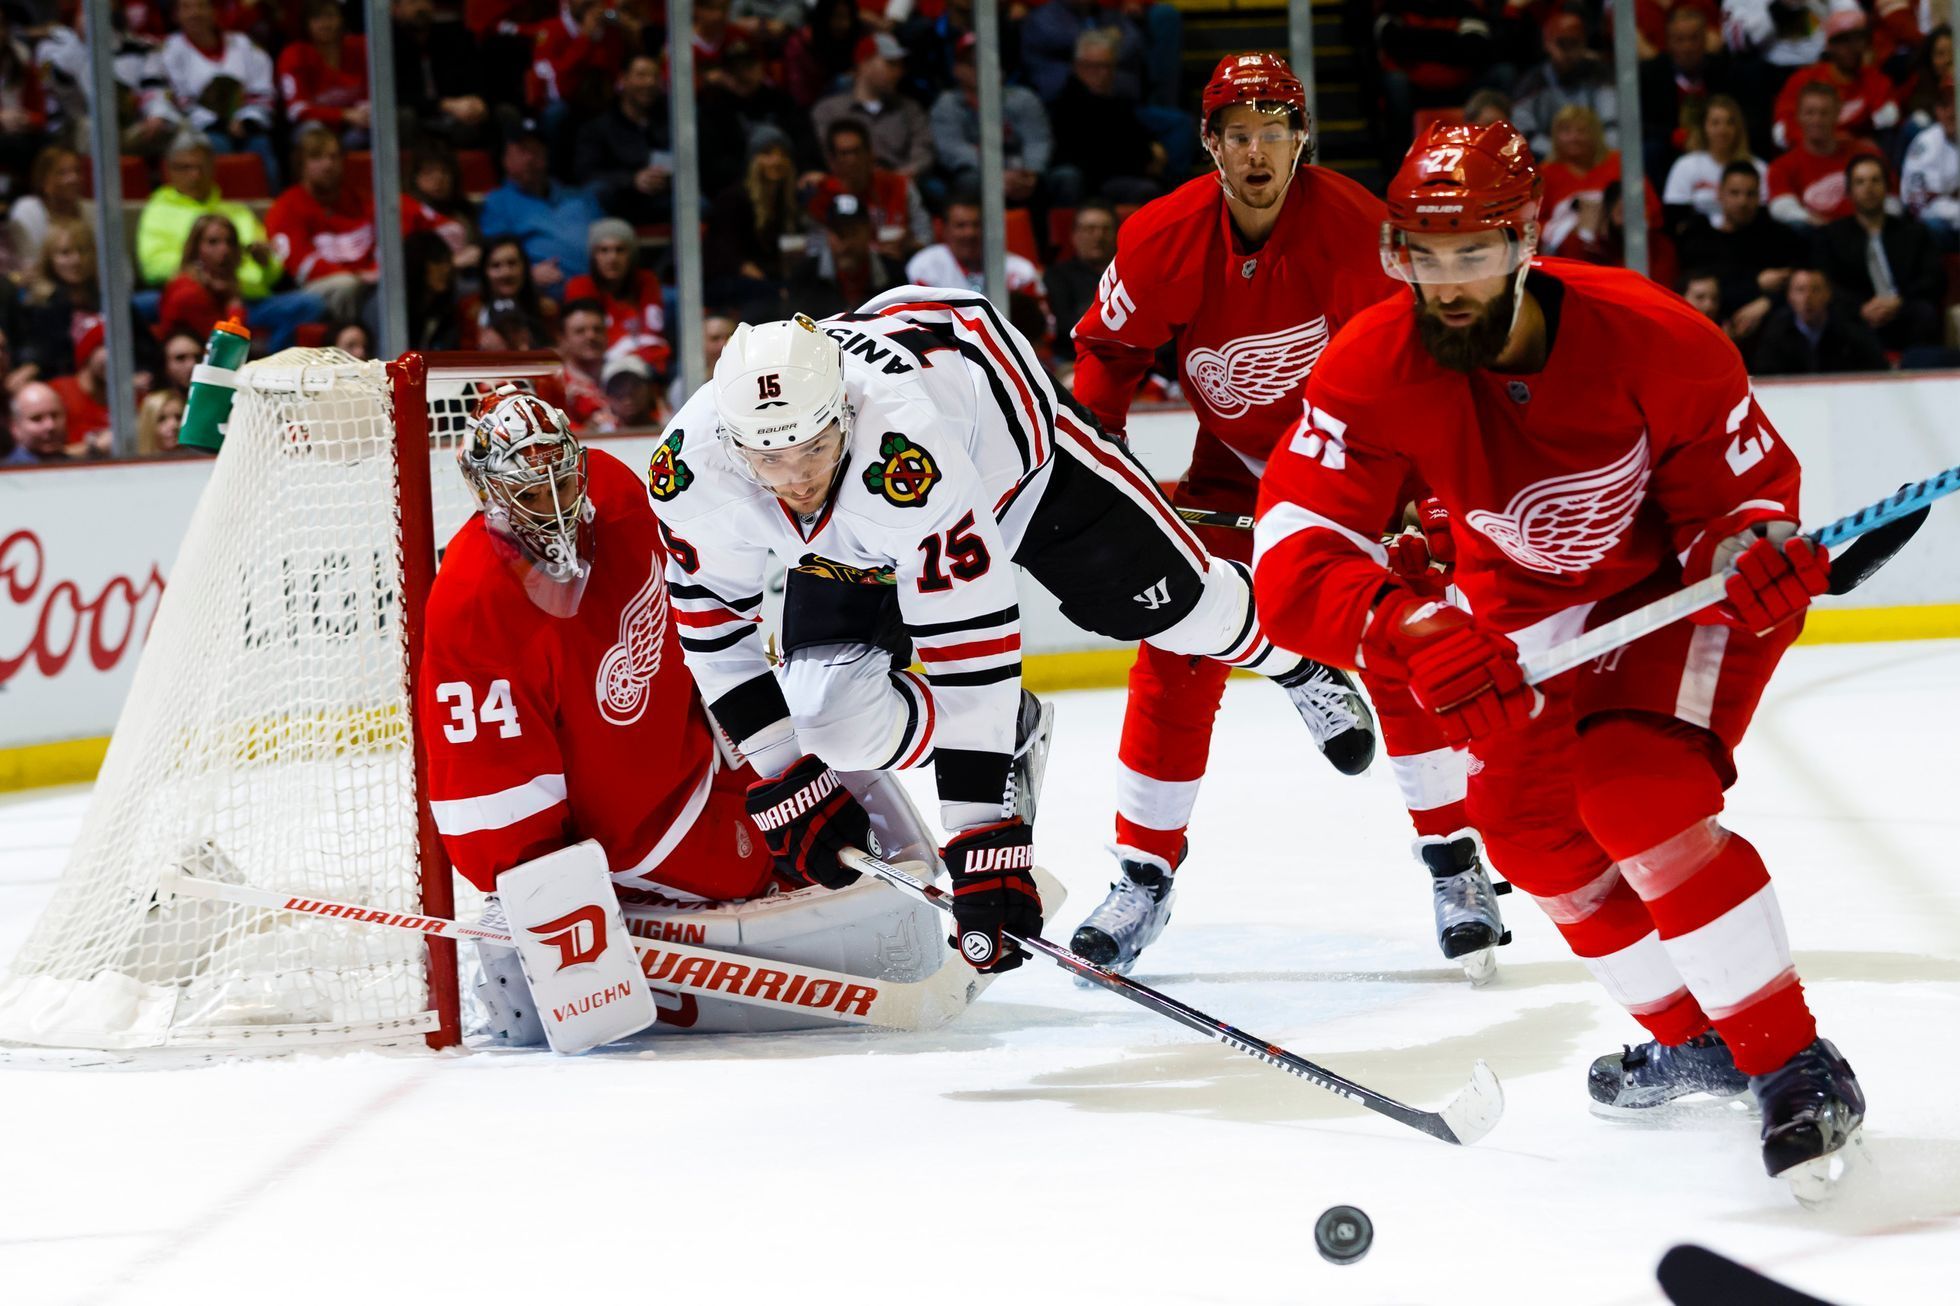 NHL: Chicago Blackhawks at Detroit Red Wings: Arťom Anisimov (15) - Petr Mrázek (34) a Kyle Quincey (27)